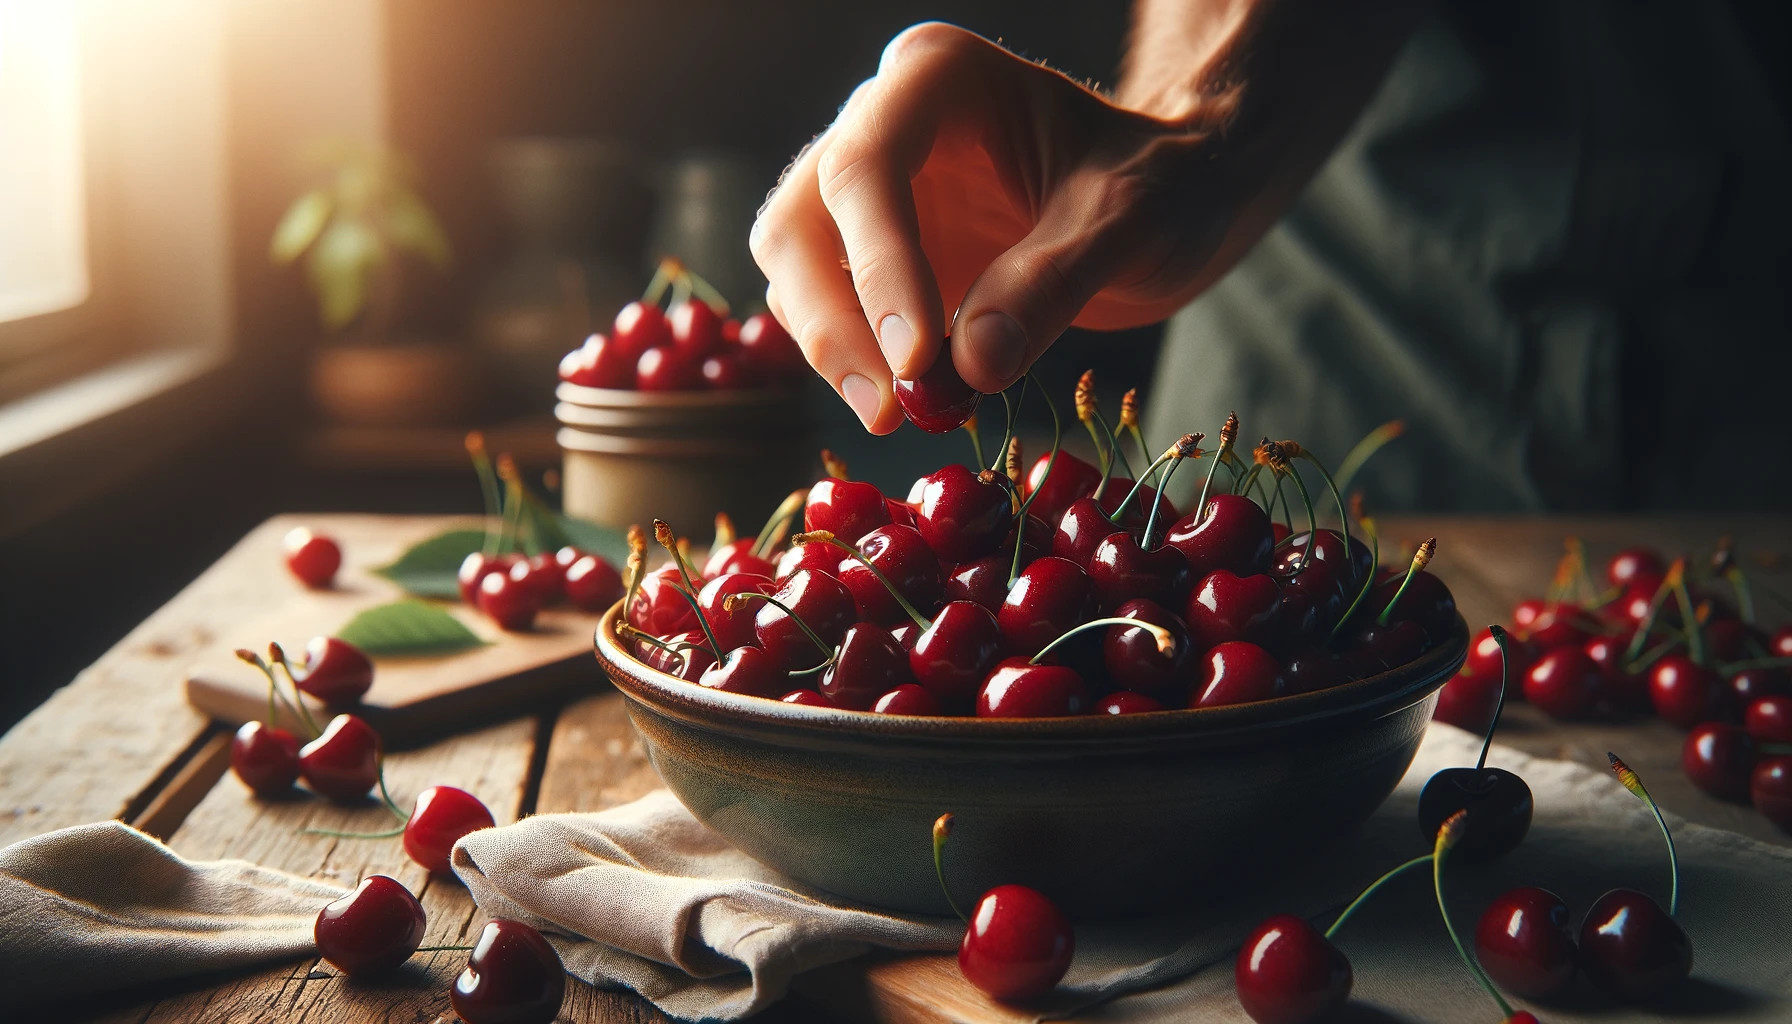 Hand-picking ripe cherries from a ceramic bowl